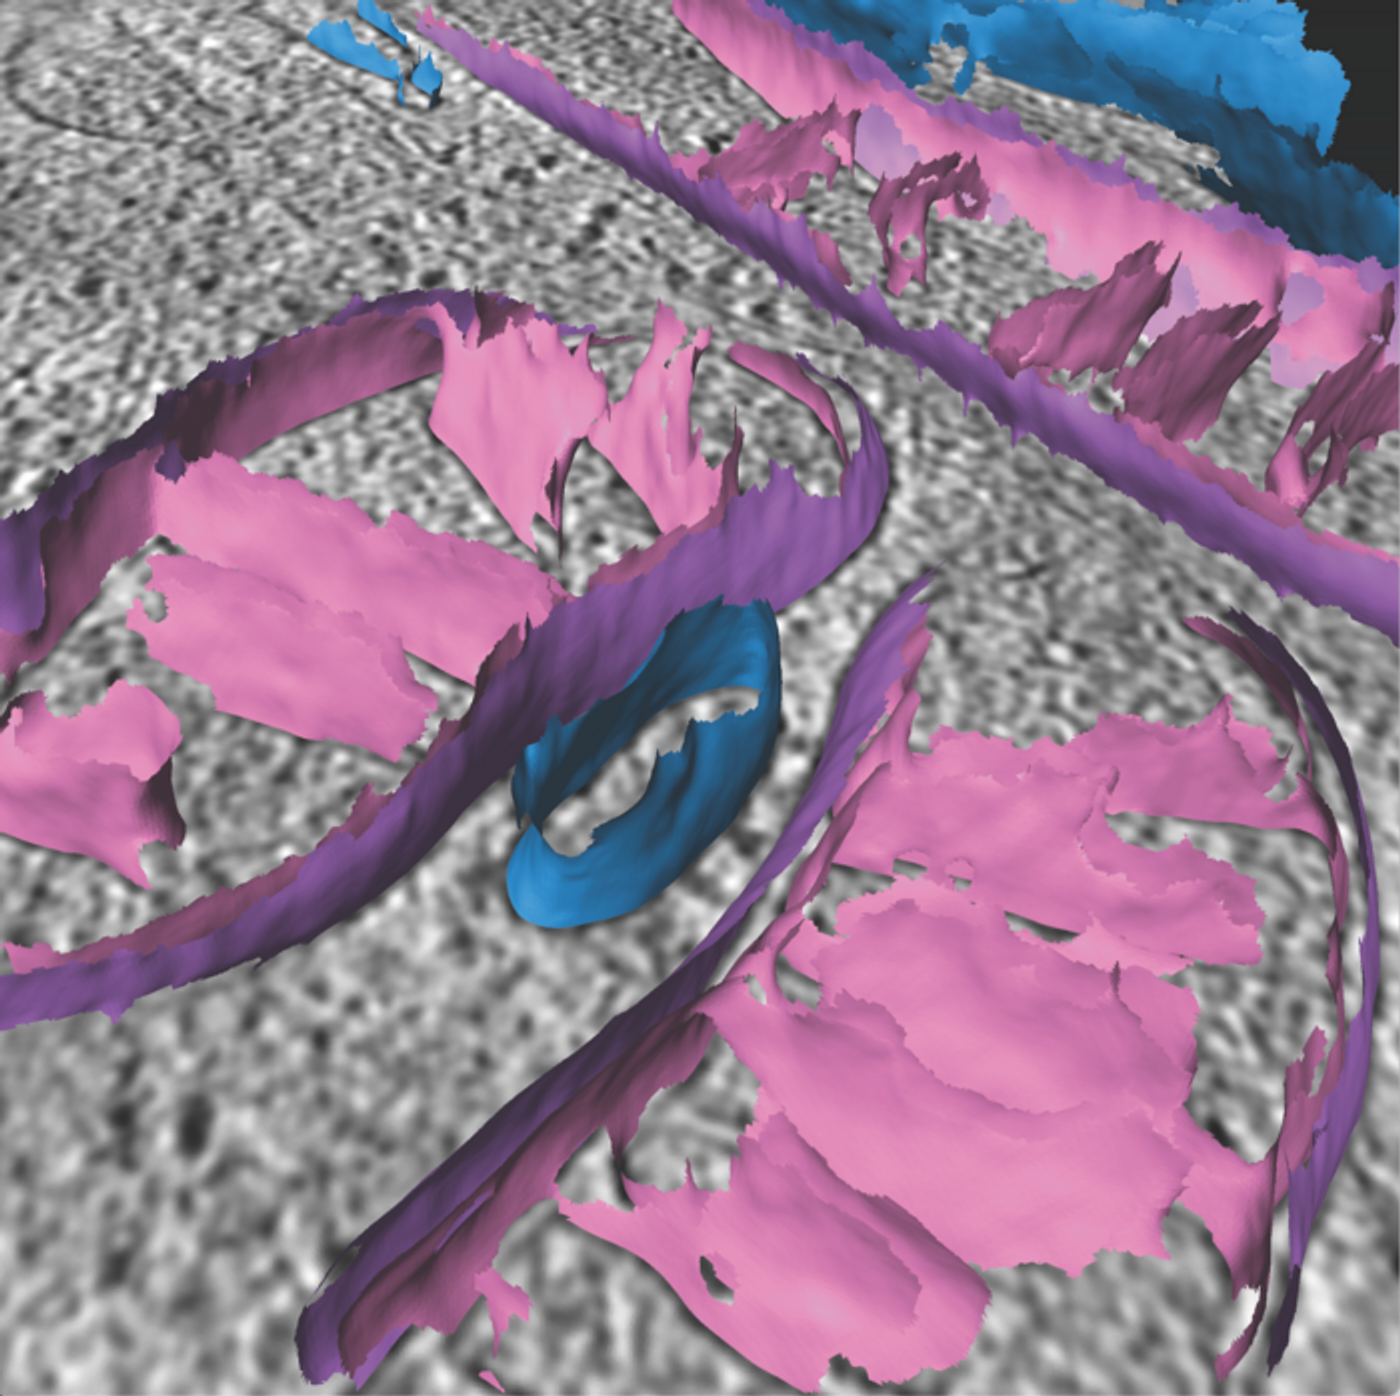 The interior of a cell captured by cryo-electron tomography imaging and overlayed with three-dimensional reconstructions of mitochondrial inner (pink), outer (purple) and endoplasmic reticulum (blue) membrane surfaces. Credit  Scripps Research